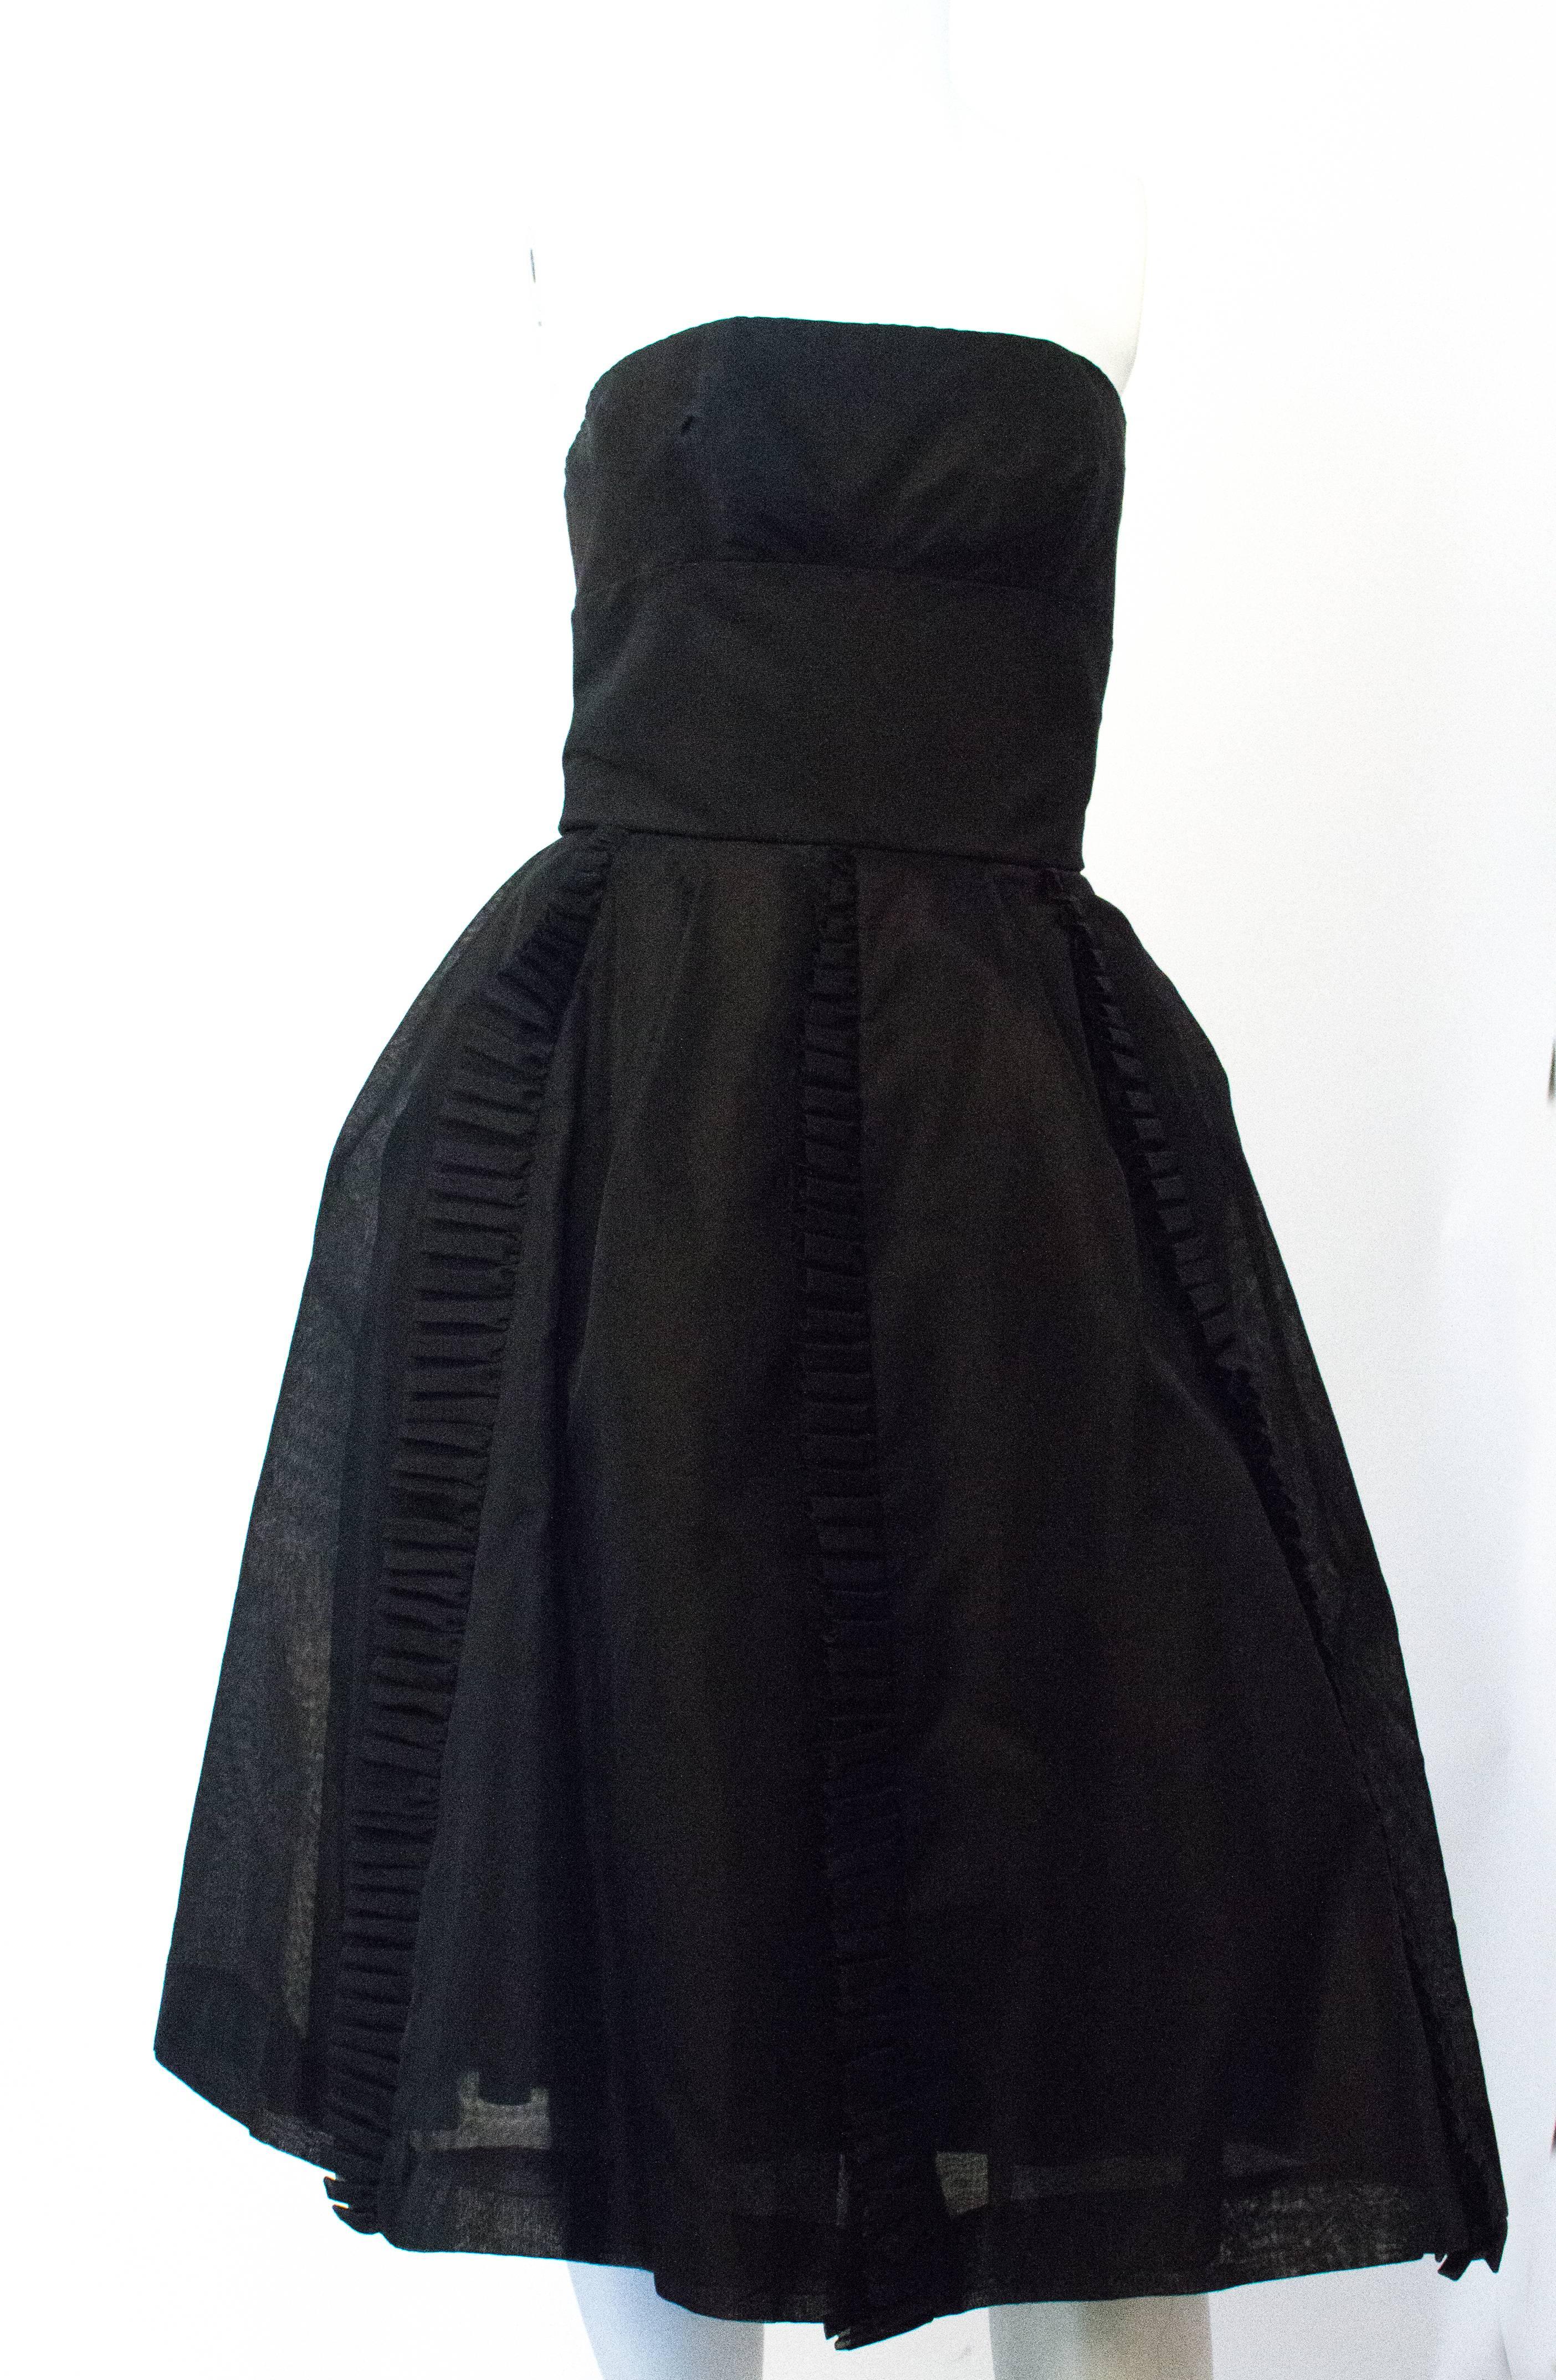 1950's Jeunes Filles dress designed by Jacques Hein for I Magnin & Co. This piece is constructed with a gros grain bodice and is fully lined. The shell is silk organza and features a metal zipper at center back. 

